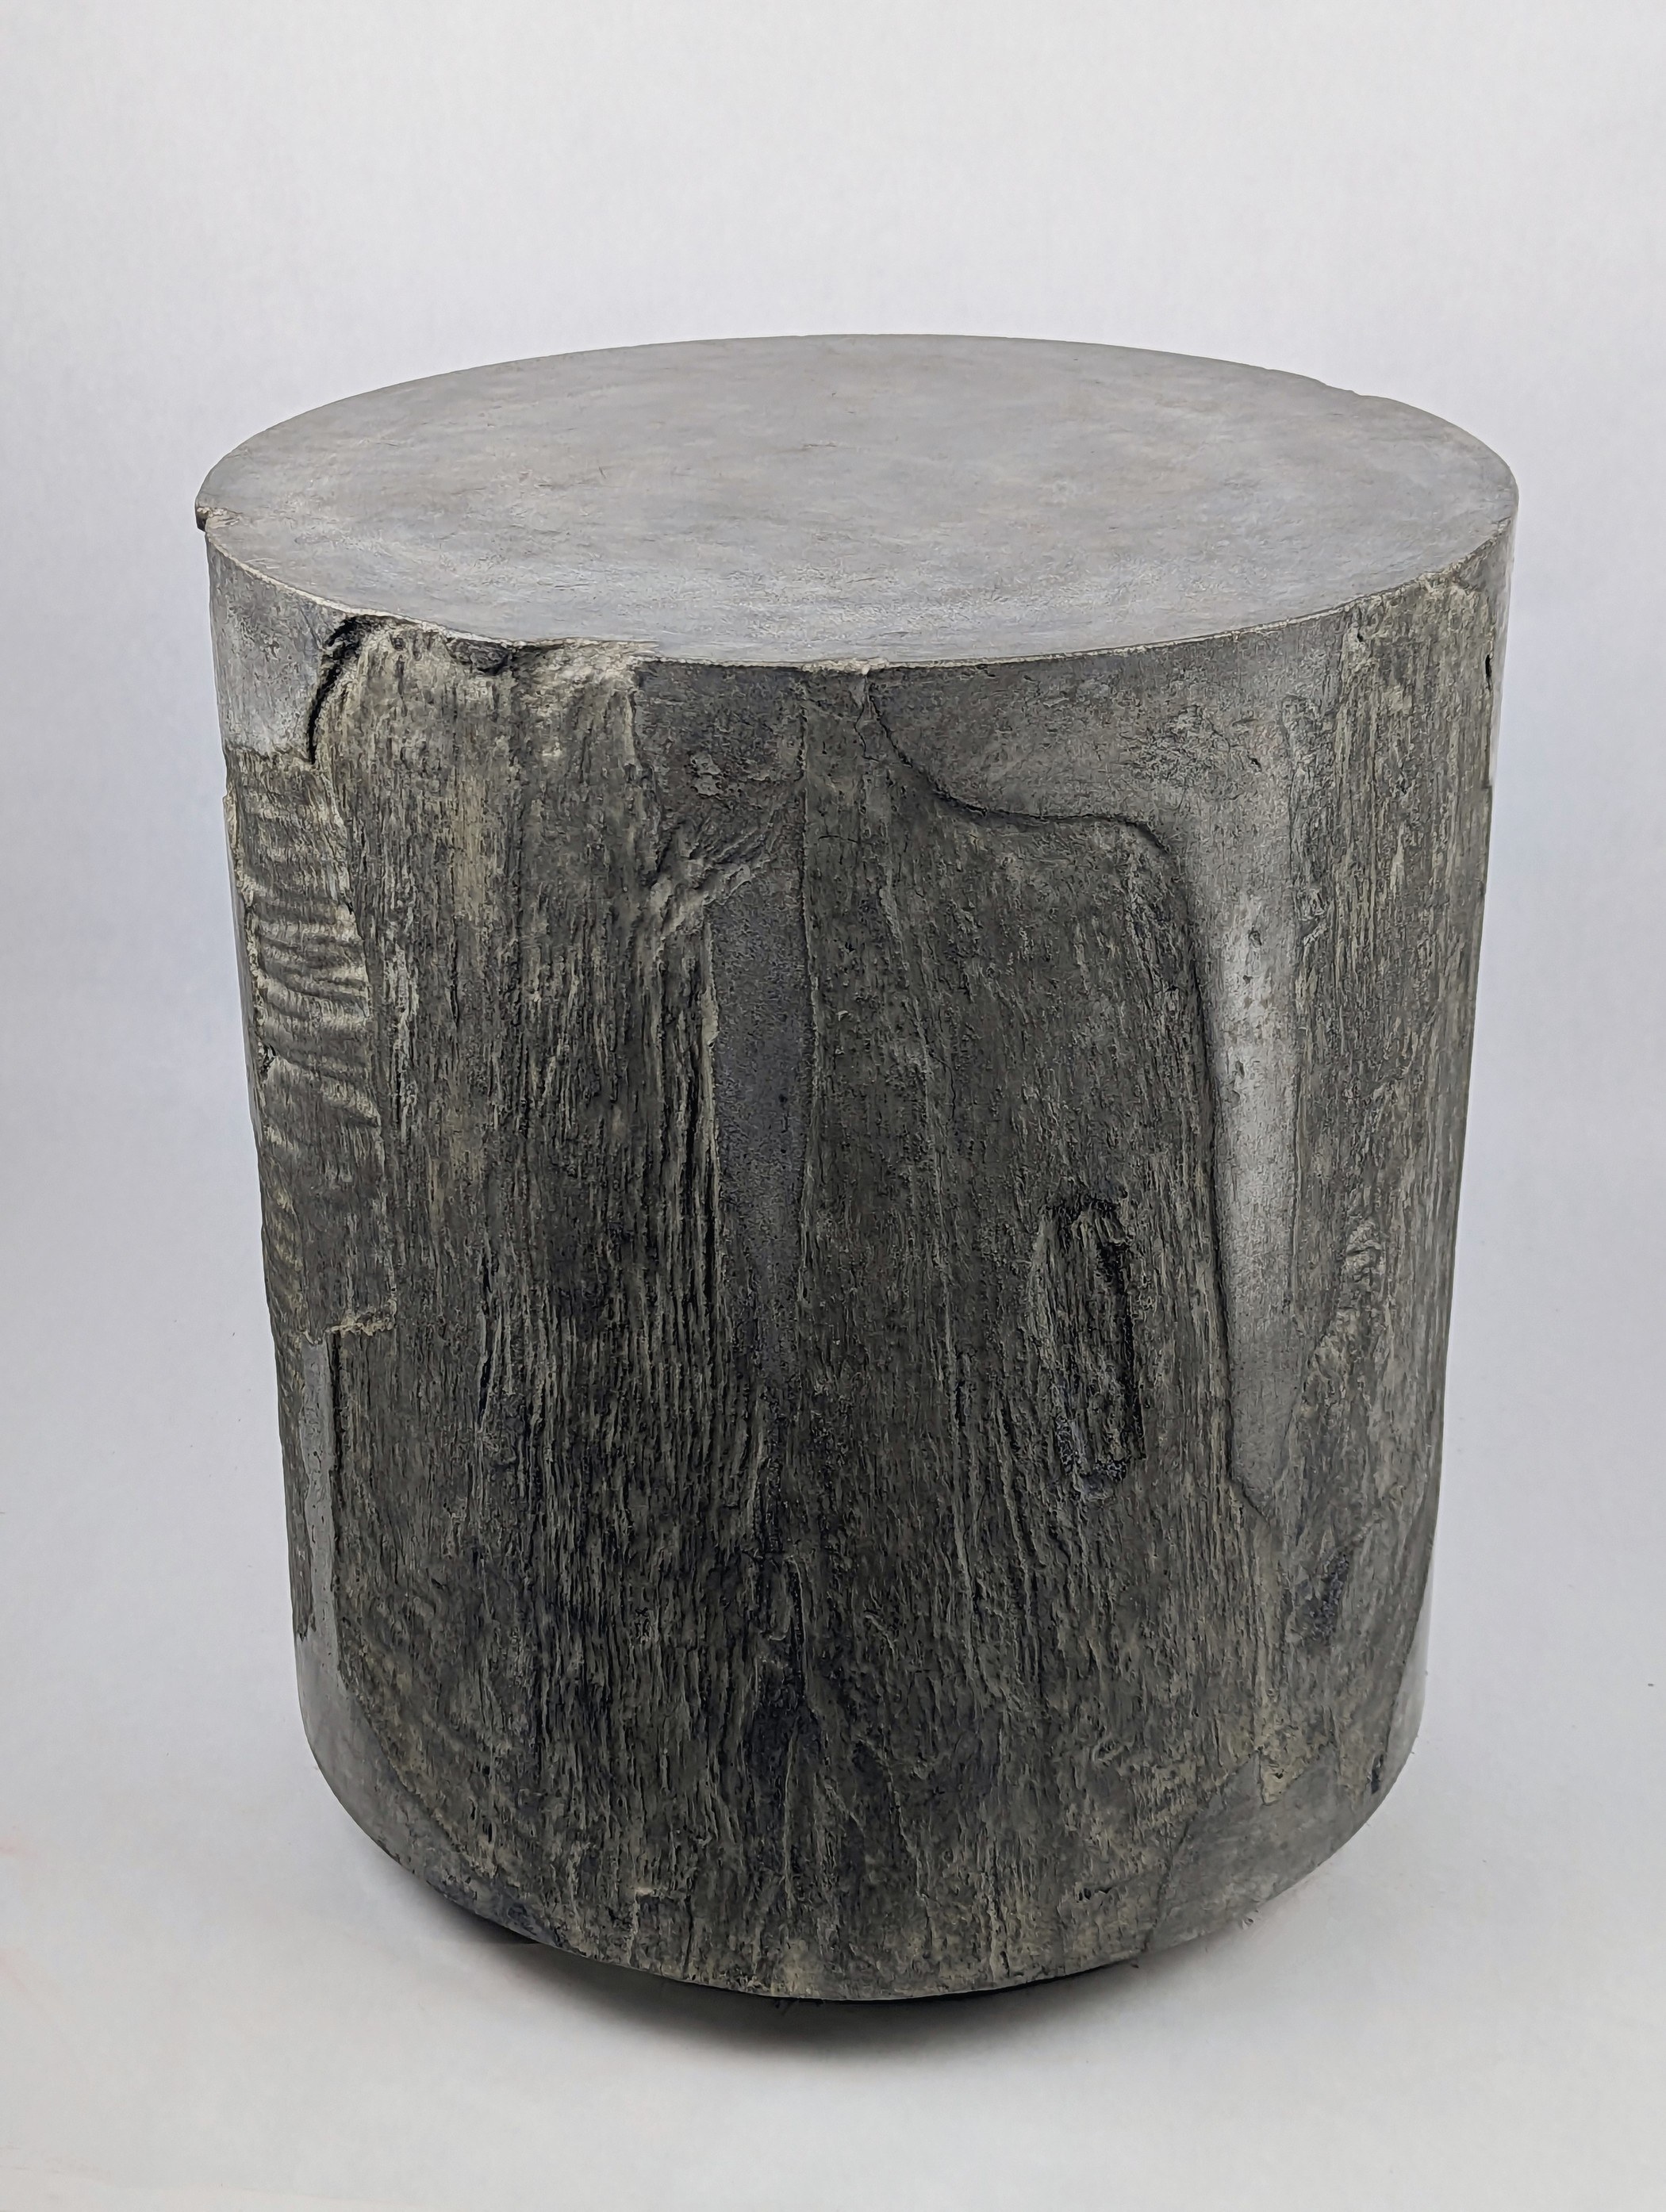 Textured grey concrete Side Table stool